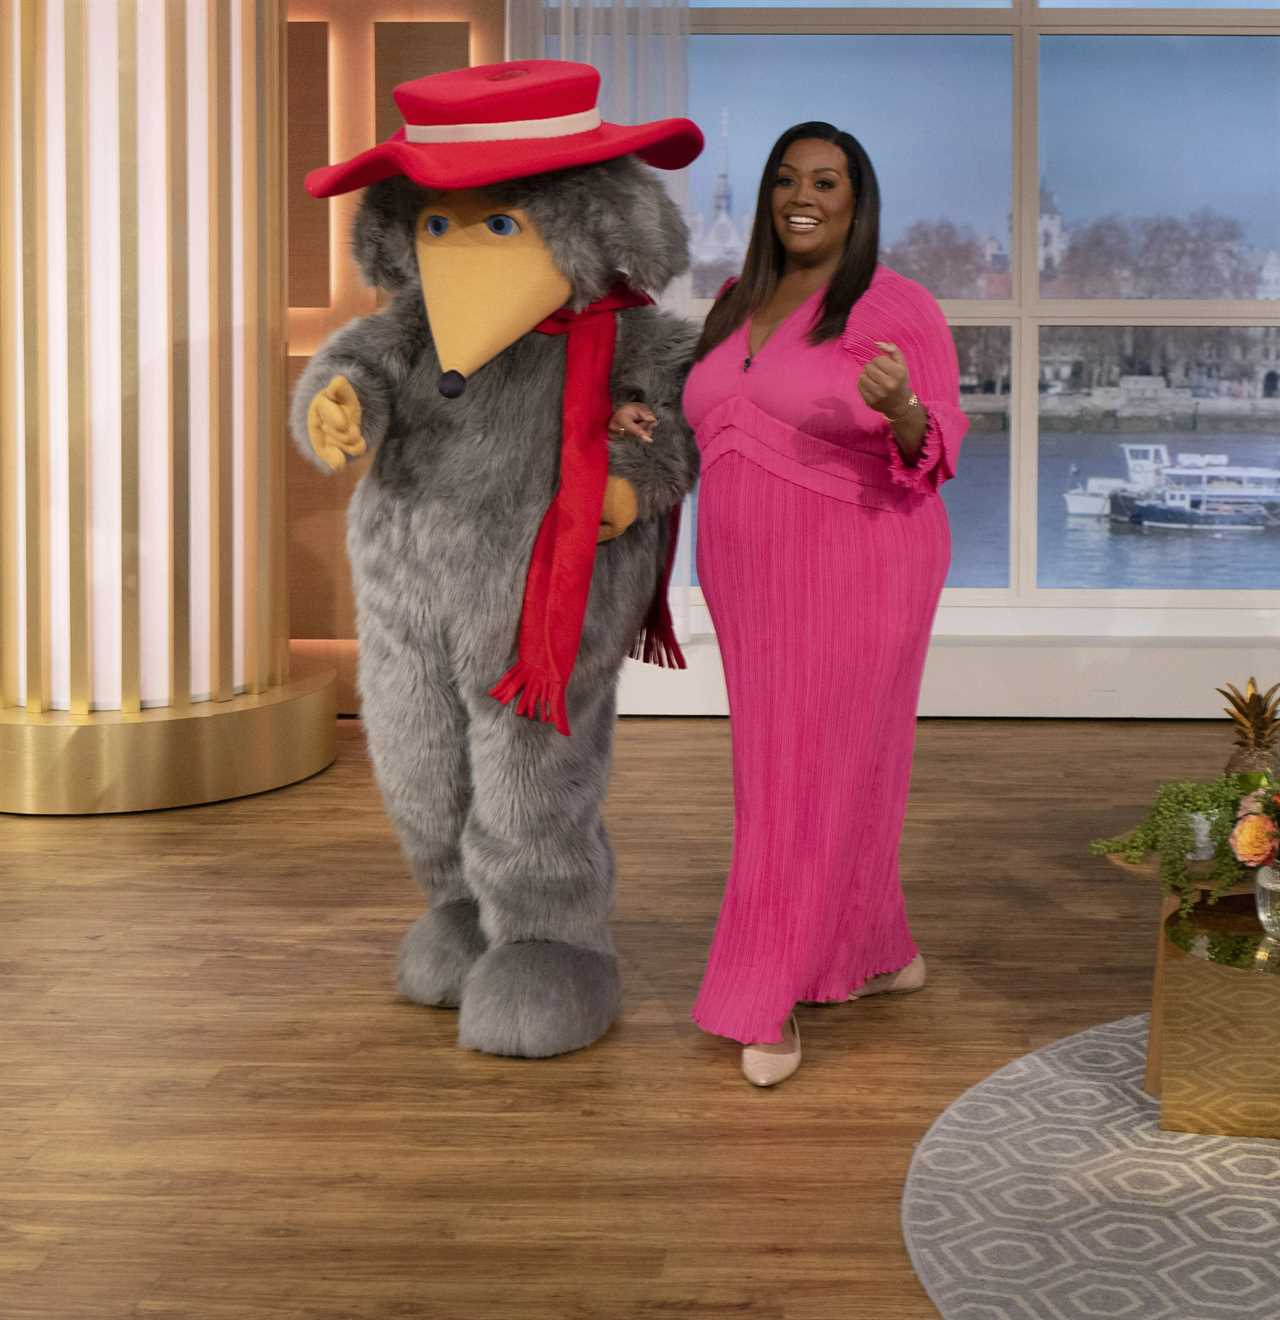 This Morning fans can’t believe Alison Hammond’s real age as she looks slimmer than ever in pink dress